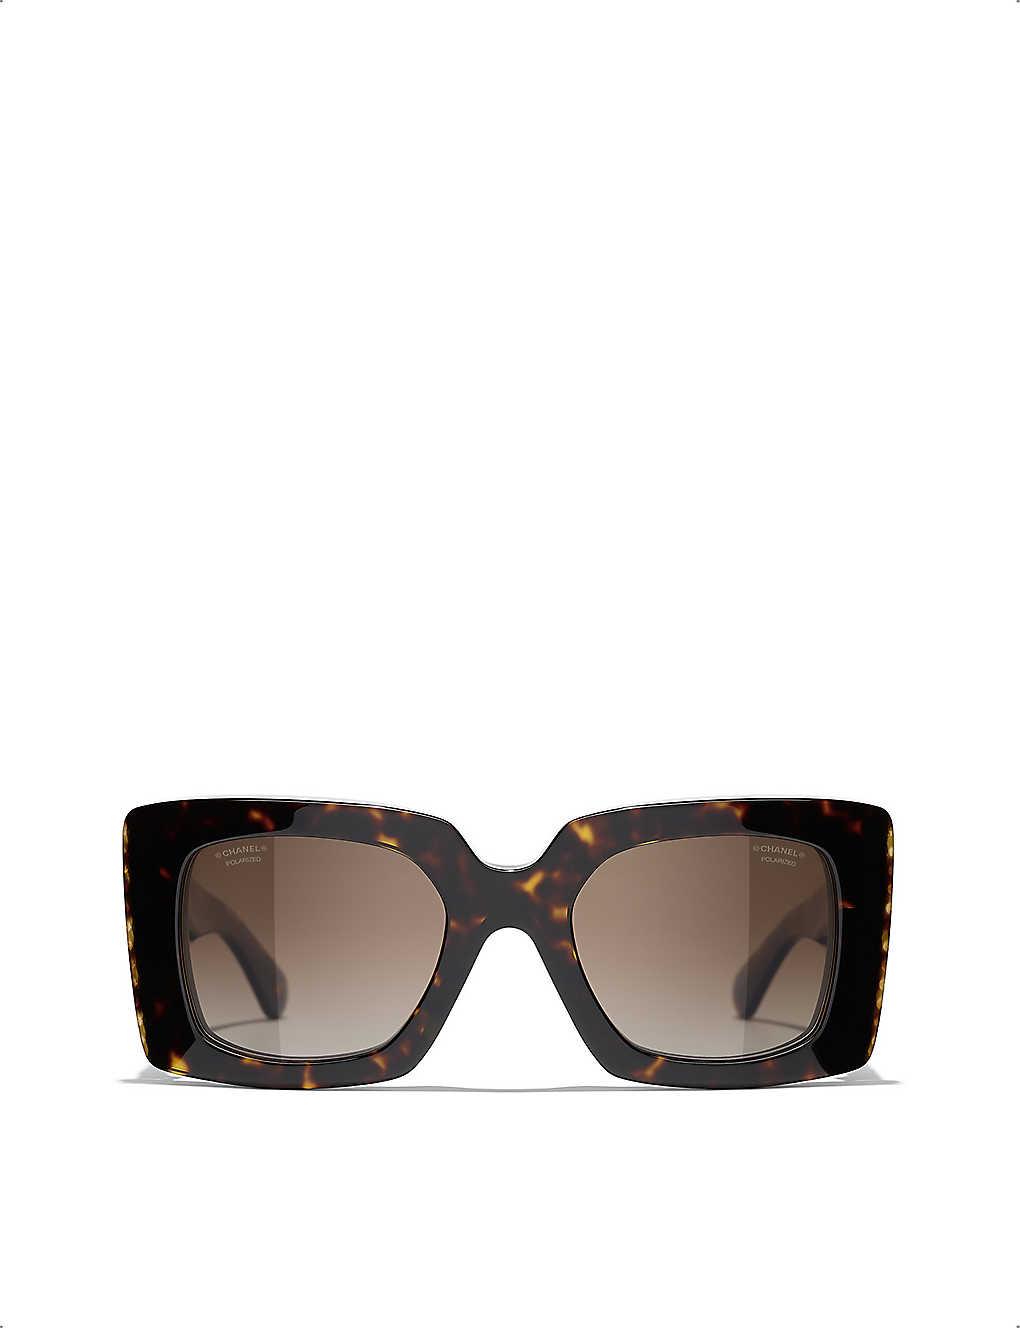 Chanel Brown Pearl Detail Sunglasses - Dress Cheshire